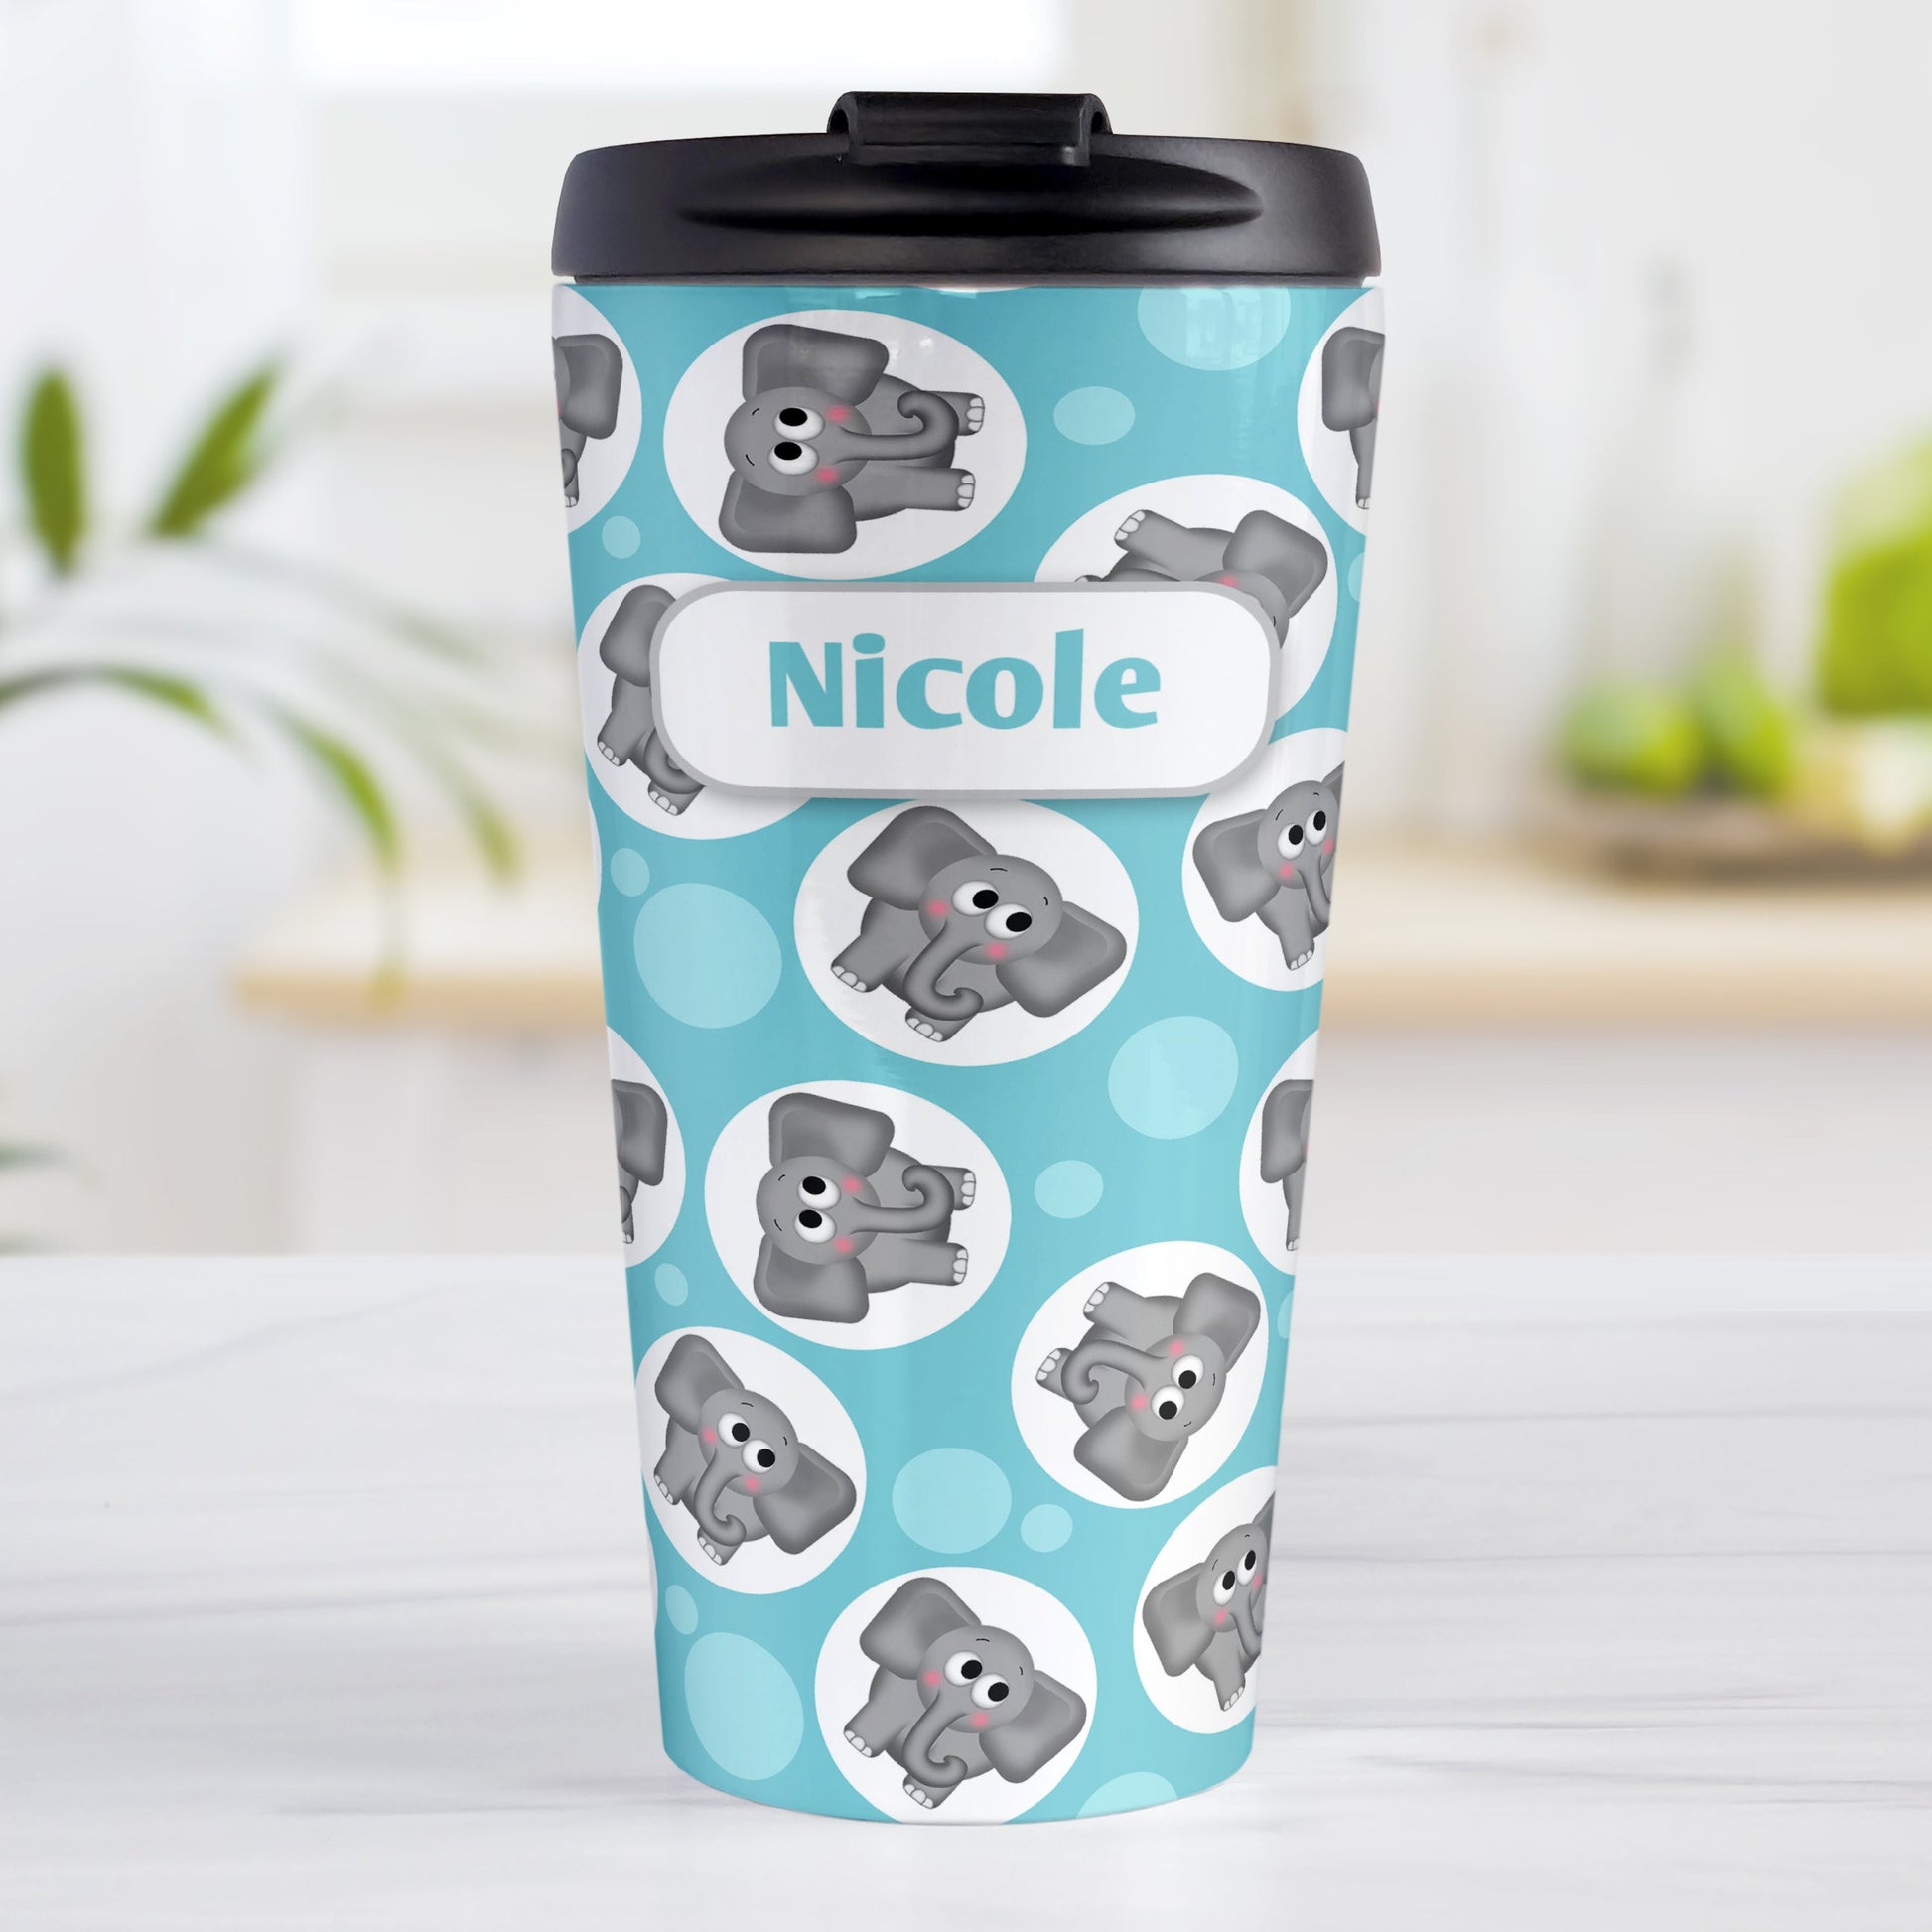 Personalized Cute Turquoise Elephant Pattern Travel Mug (15oz, stainless steel insulated) at Amy's Coffee Mugs